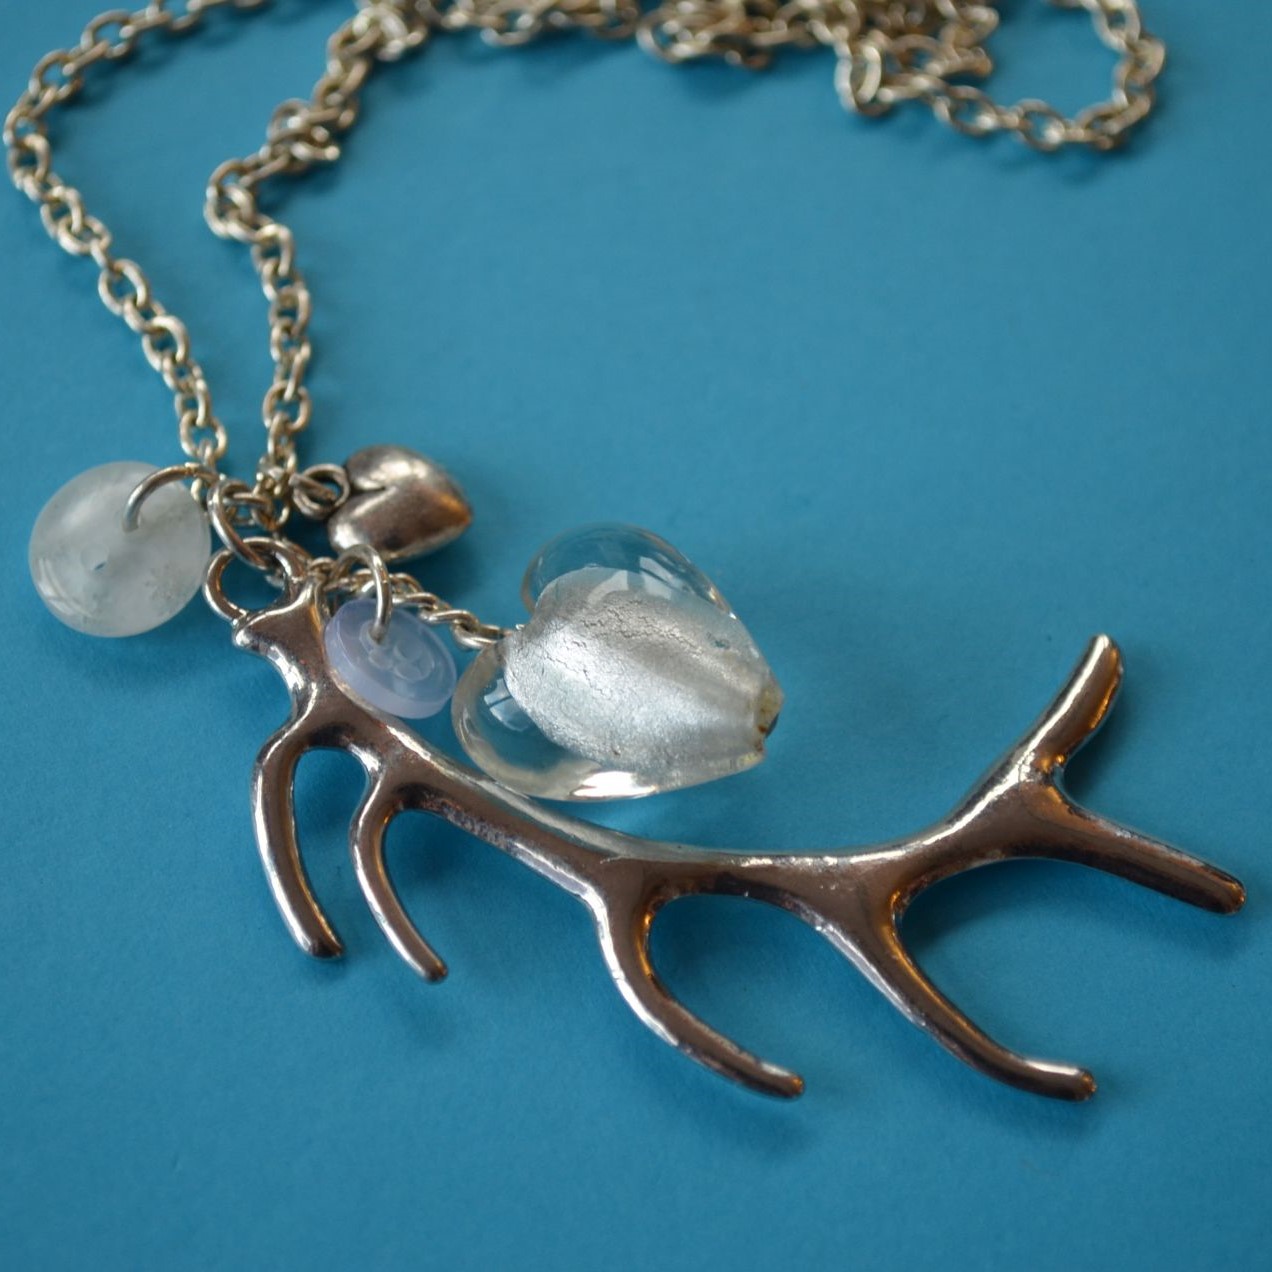 White Long Antler Necklace